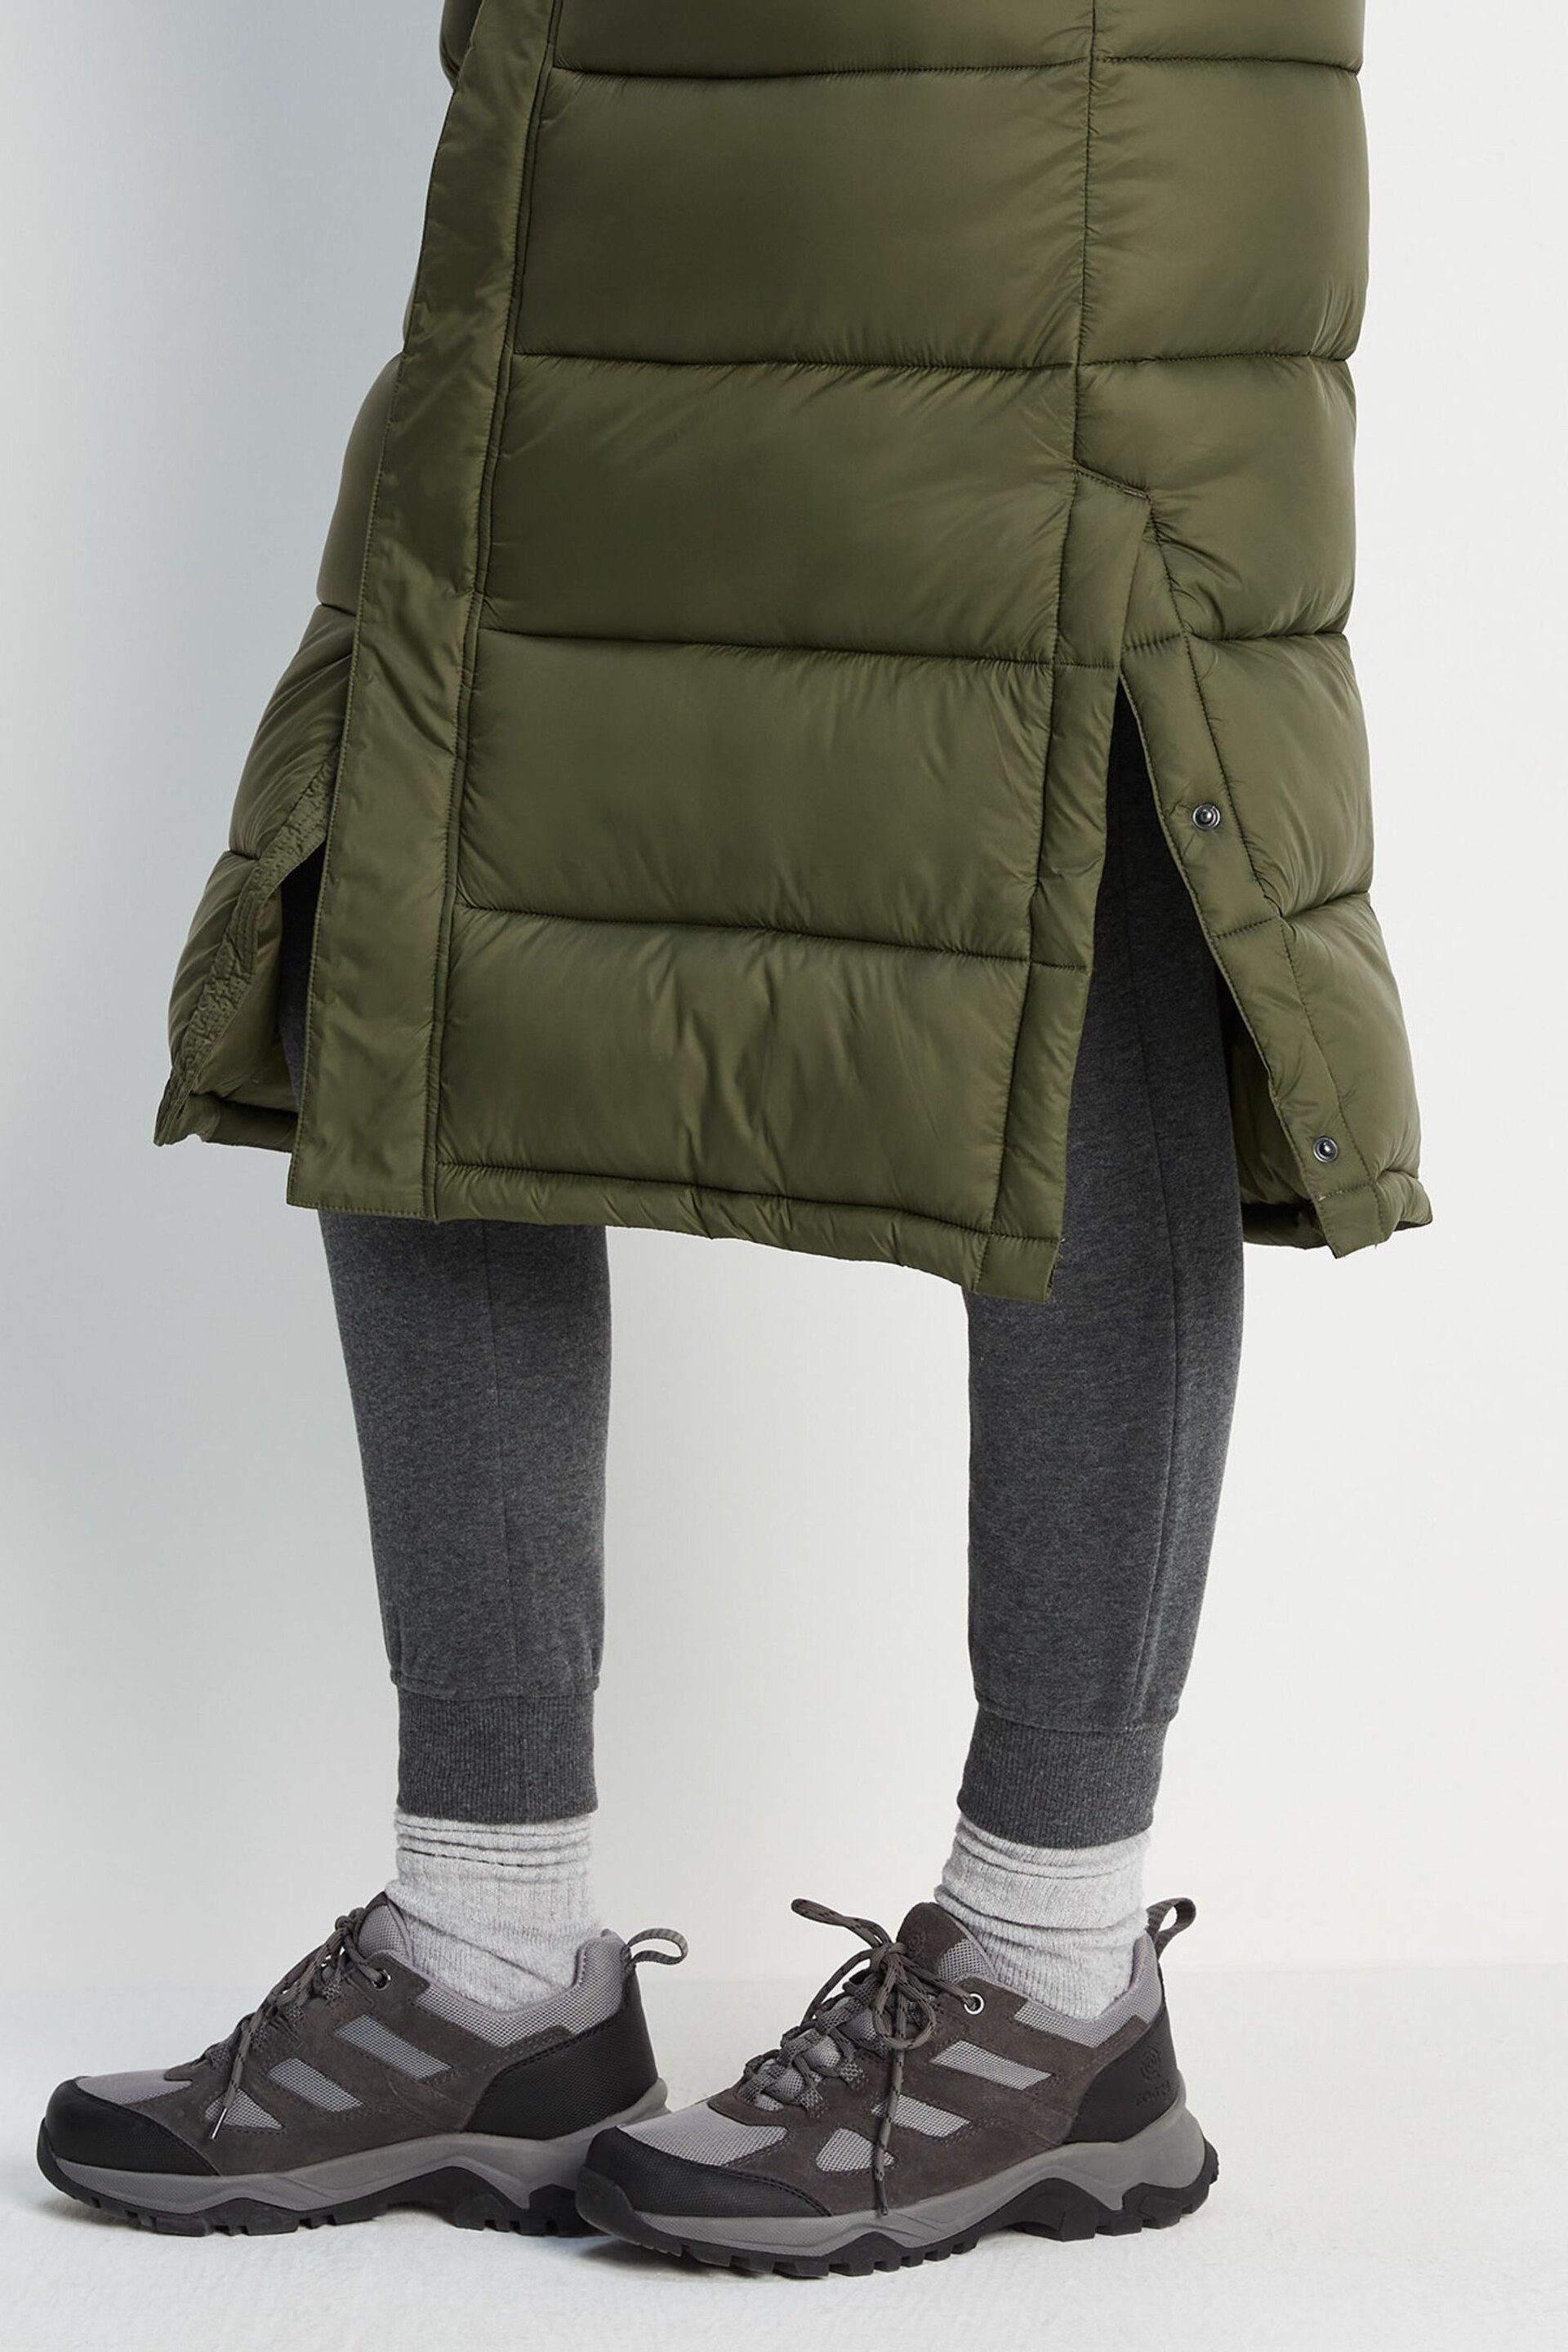 Tog 24 Green Cautley Long Padded Jacket - Image 5 of 9